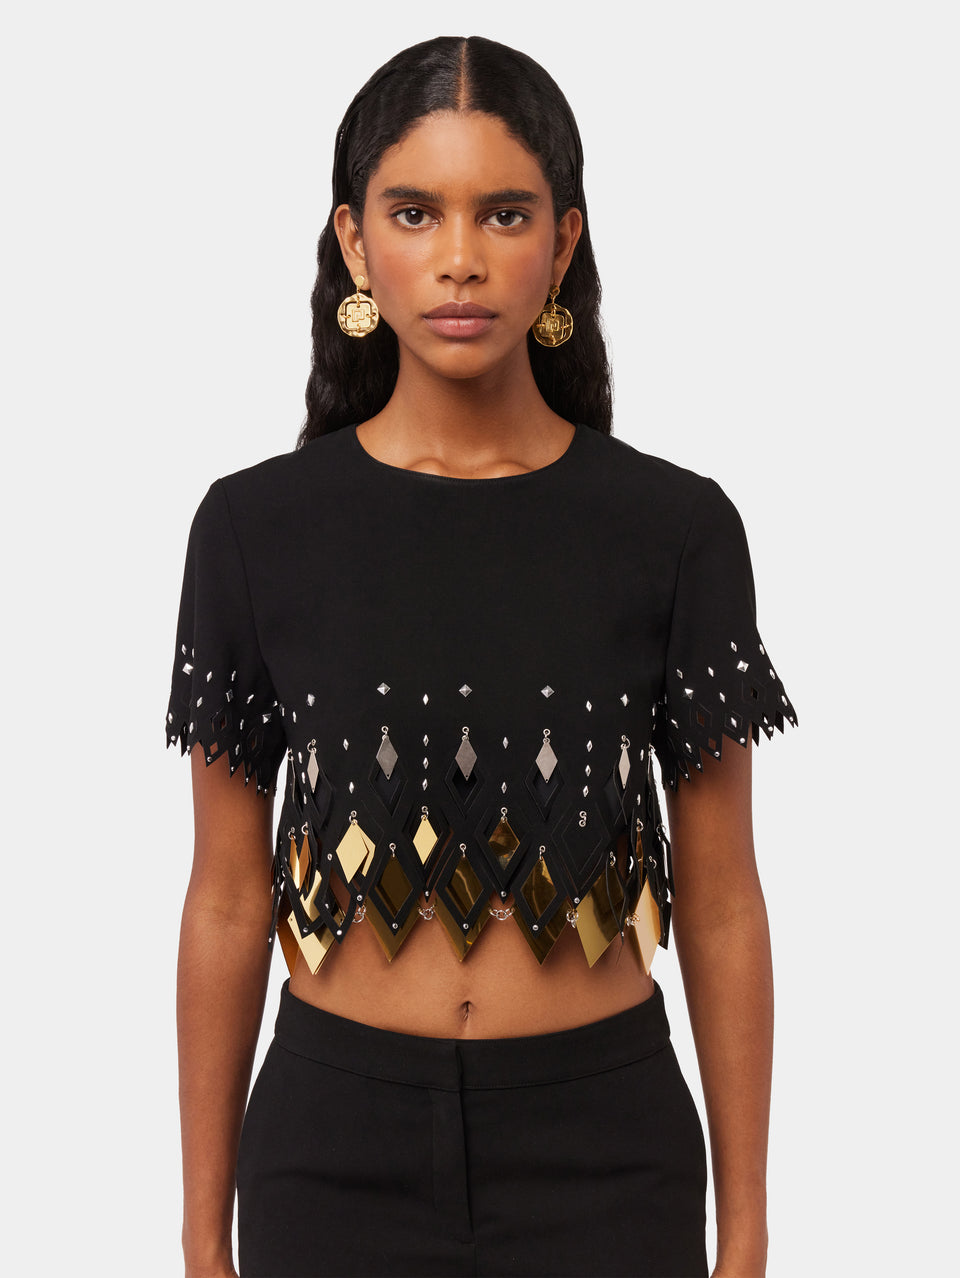 BLACK CREPE CROP TOP WITH DIAMOND-SHAPED LASER ASSEMBLY